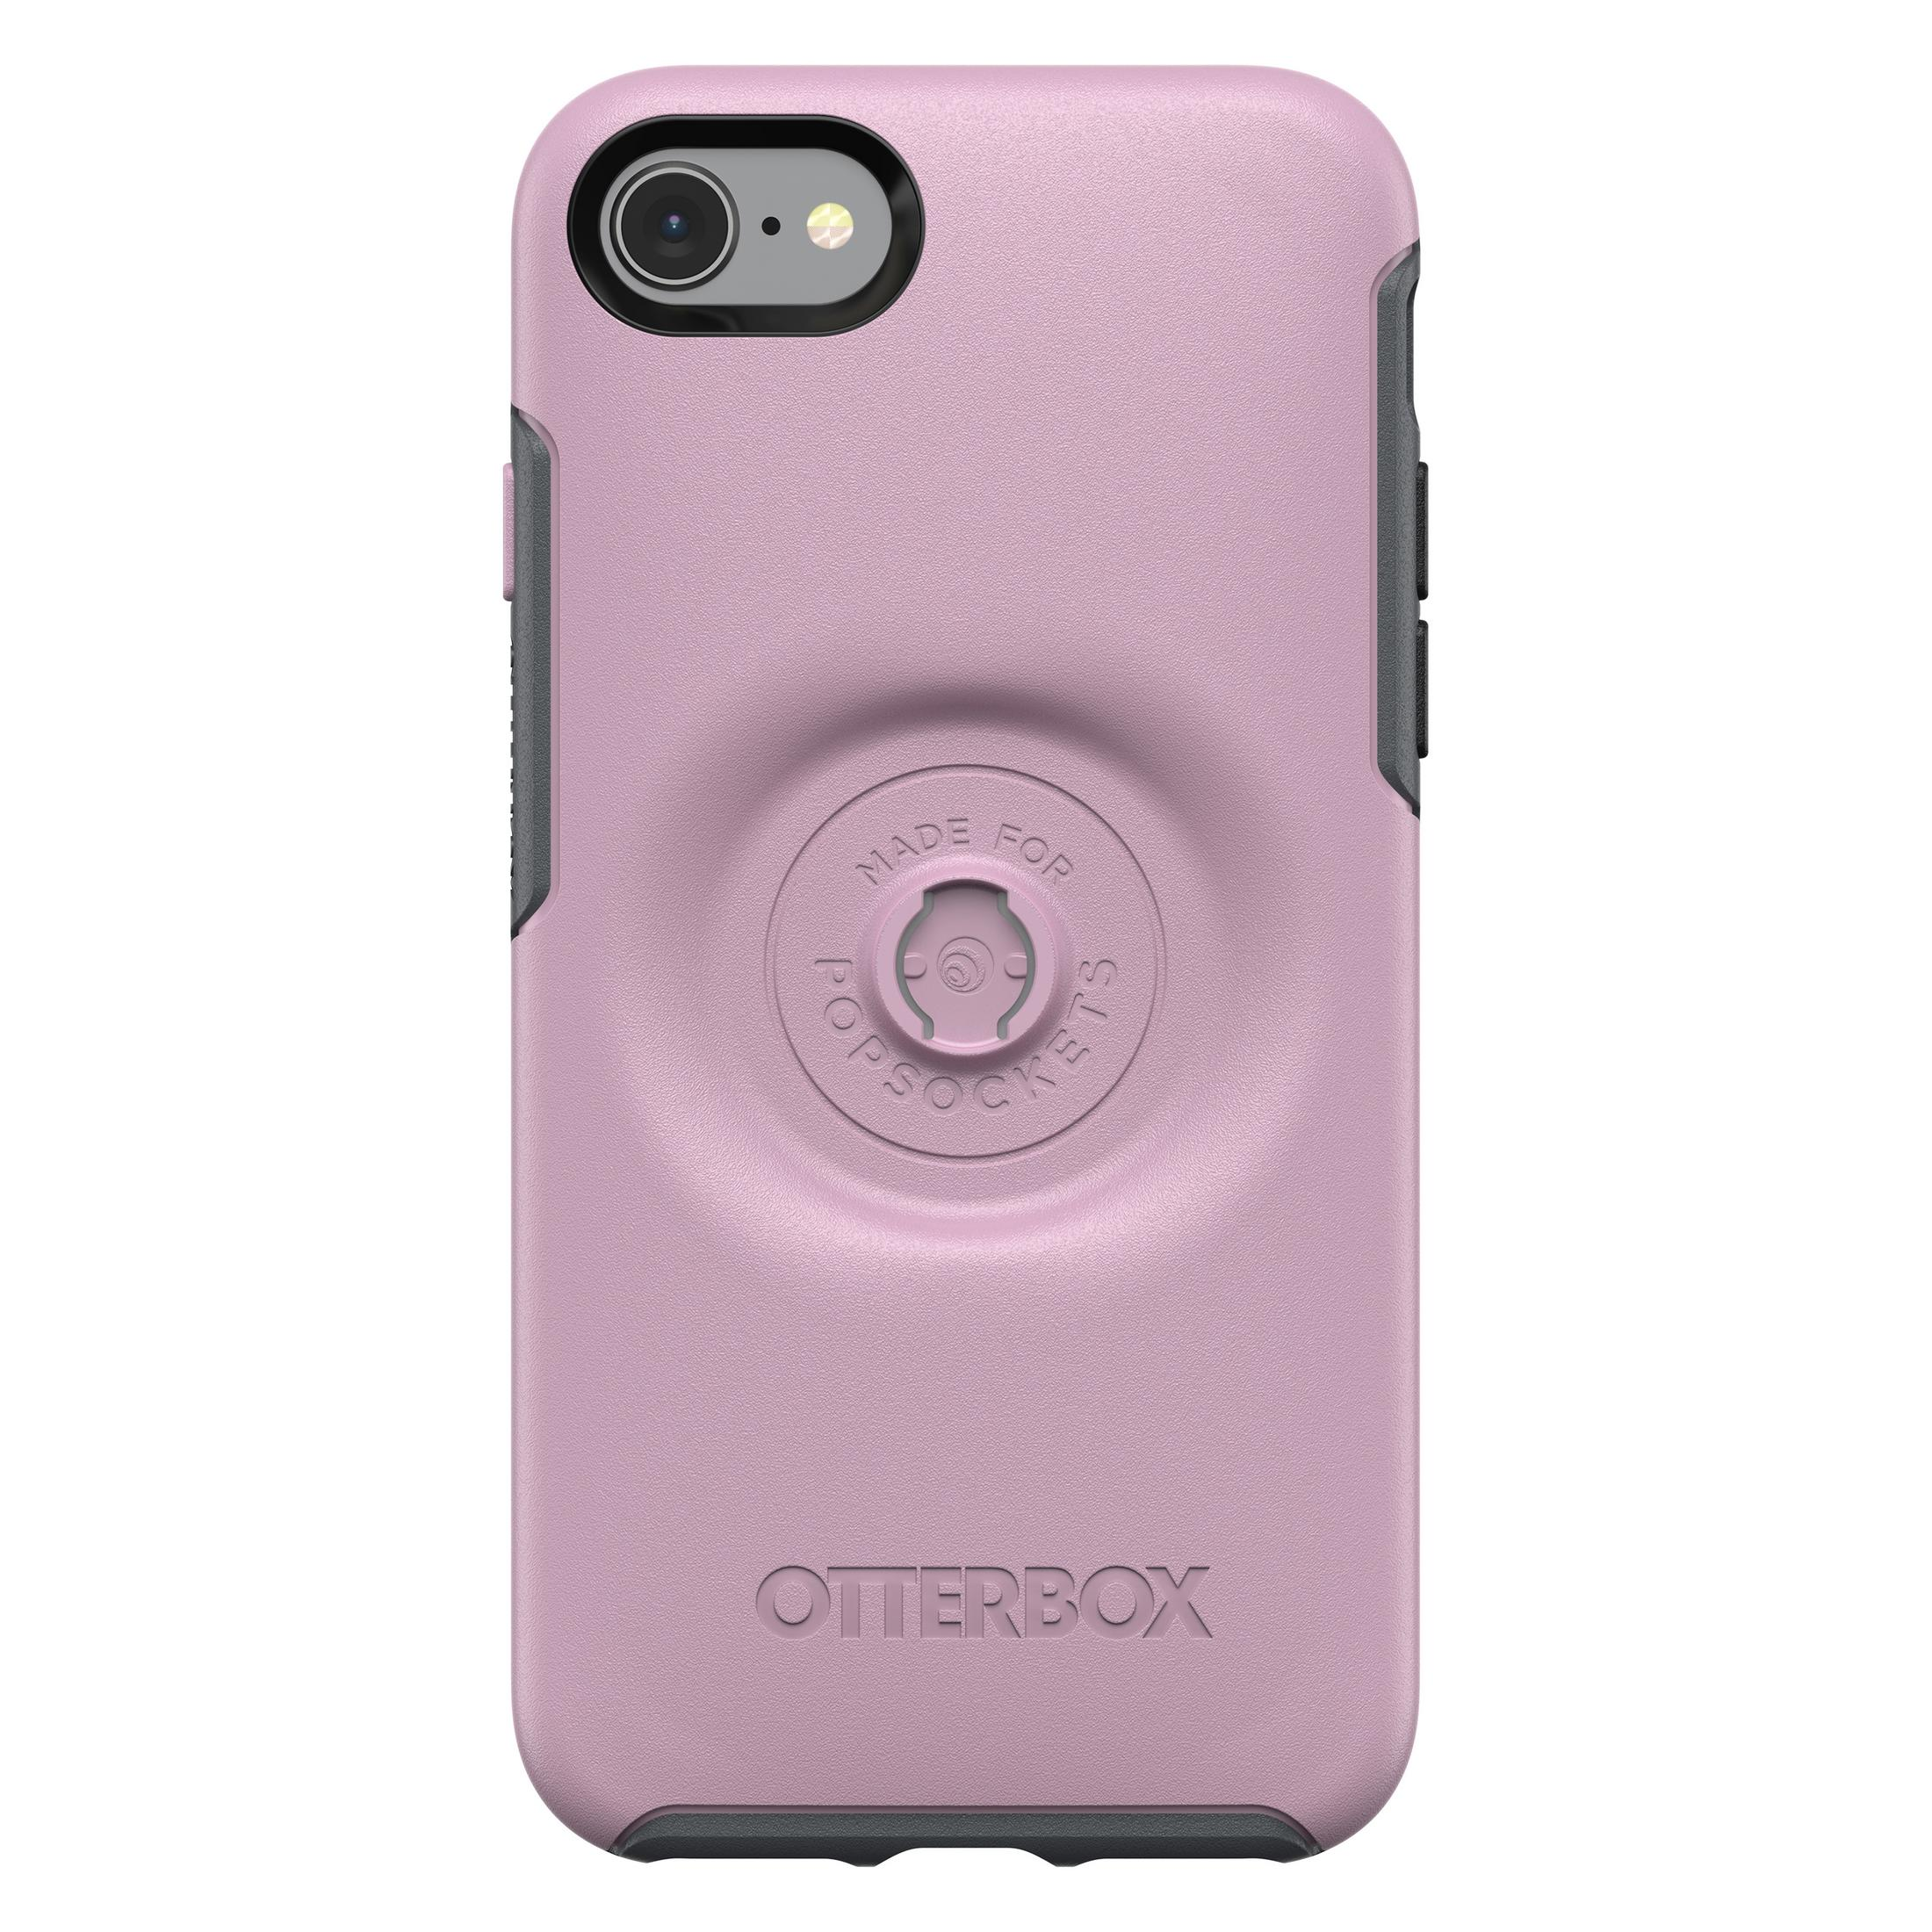 7 IP iPhone + SE iPhone Pink Backcover, POP SYMM. 7, 2 PINK, 8, 77-61657 OTTER 8 OTTERBOX Apple,